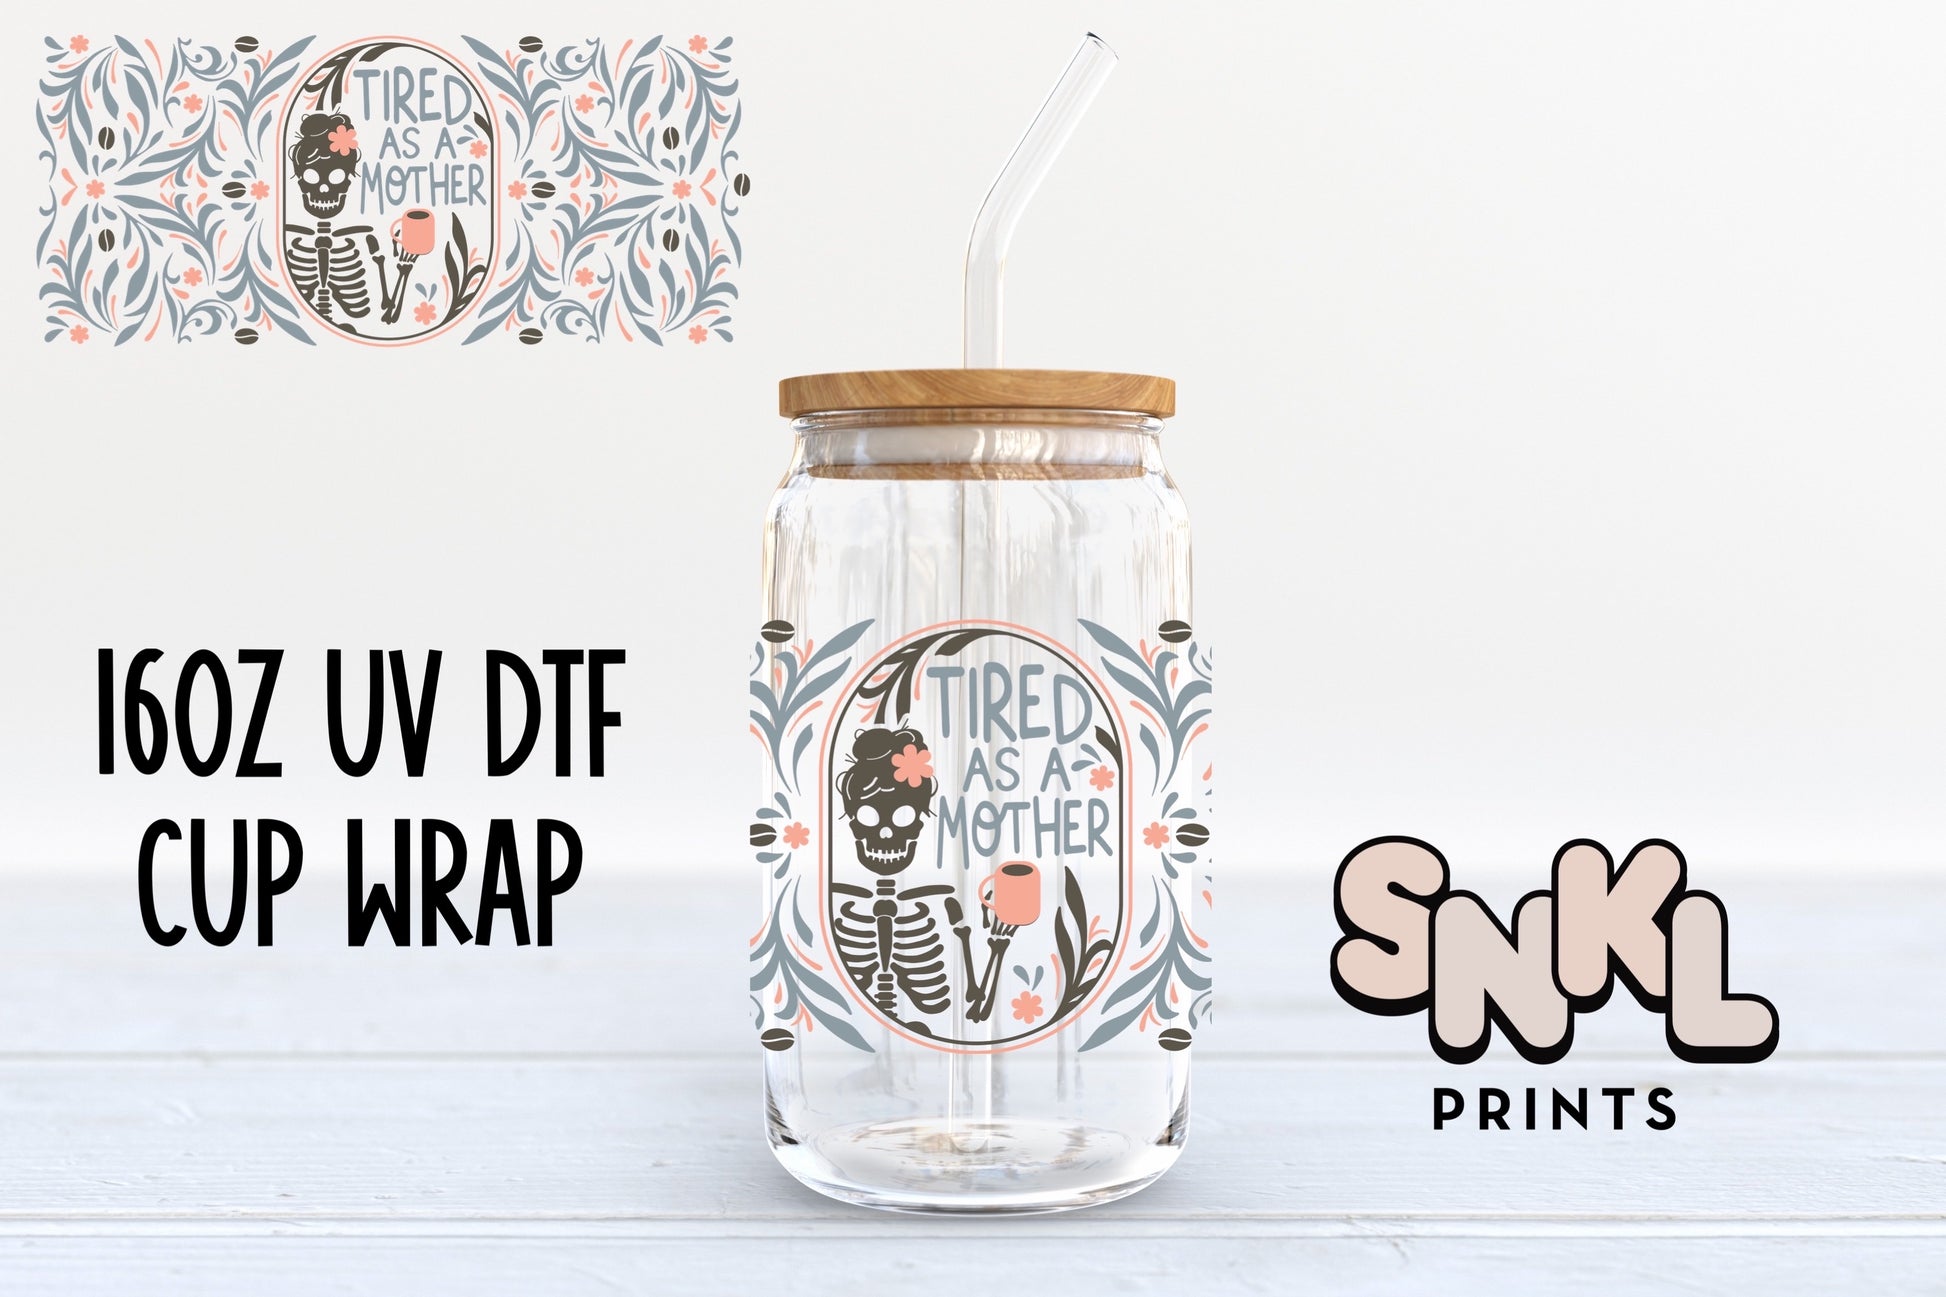 UV DTF Cup Wraps for 16oz Can Glass Cups